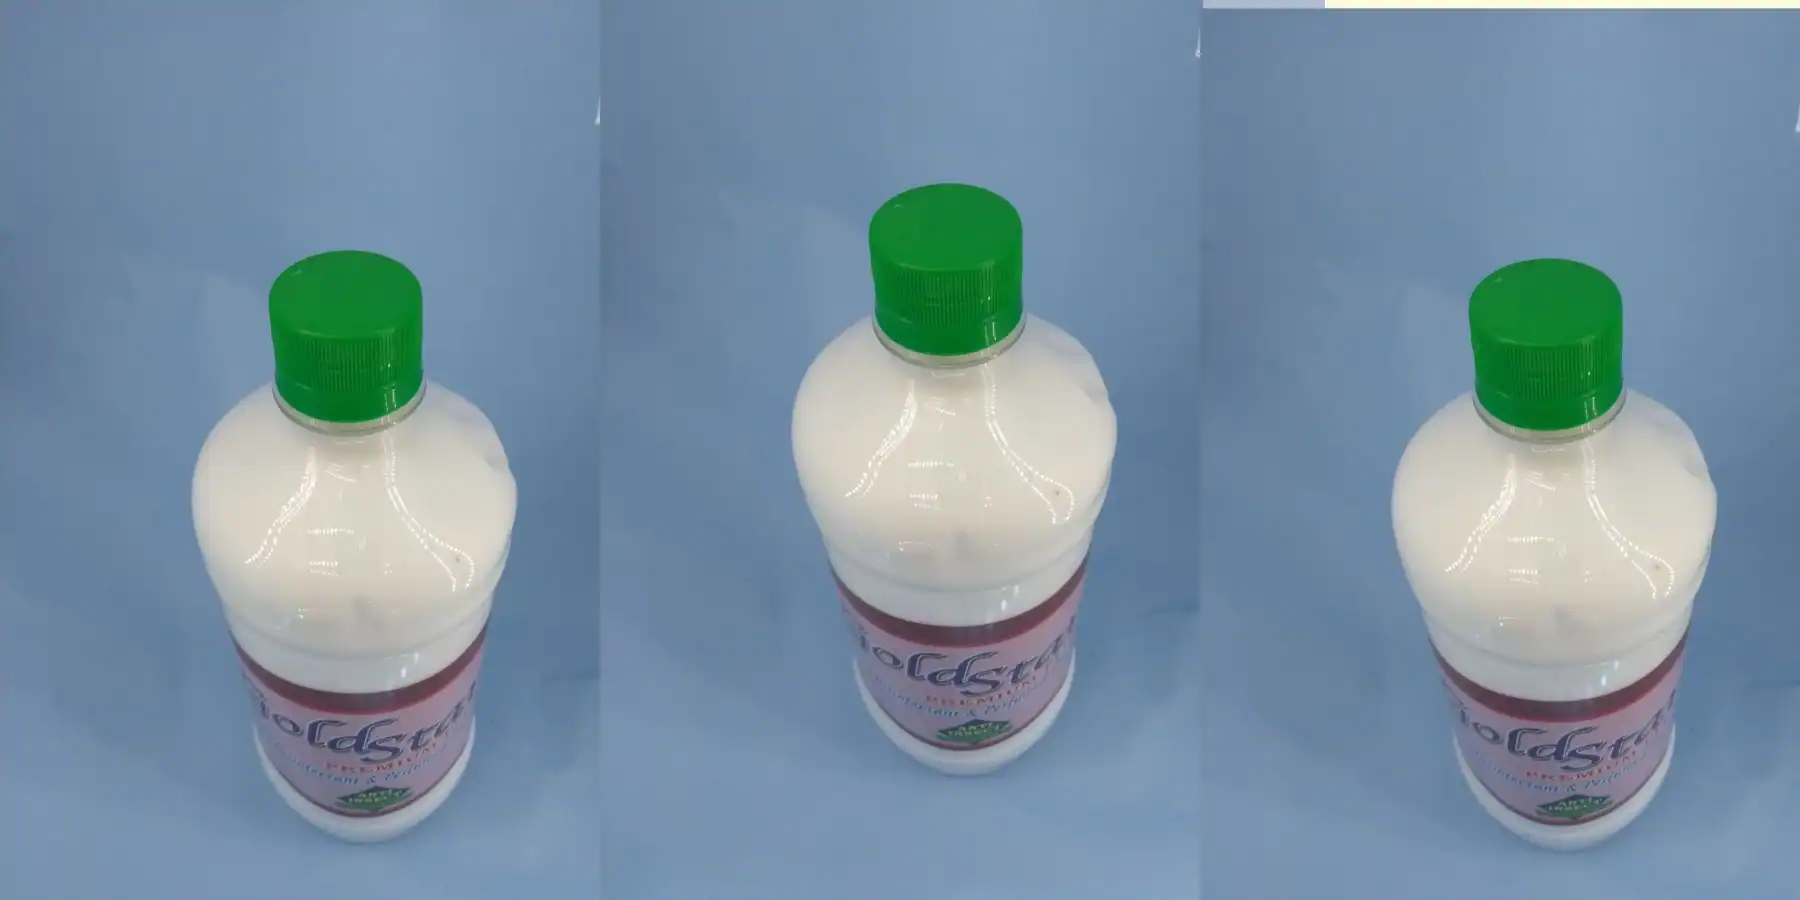 How to make White phenyl and how to start a white phenyl making business?